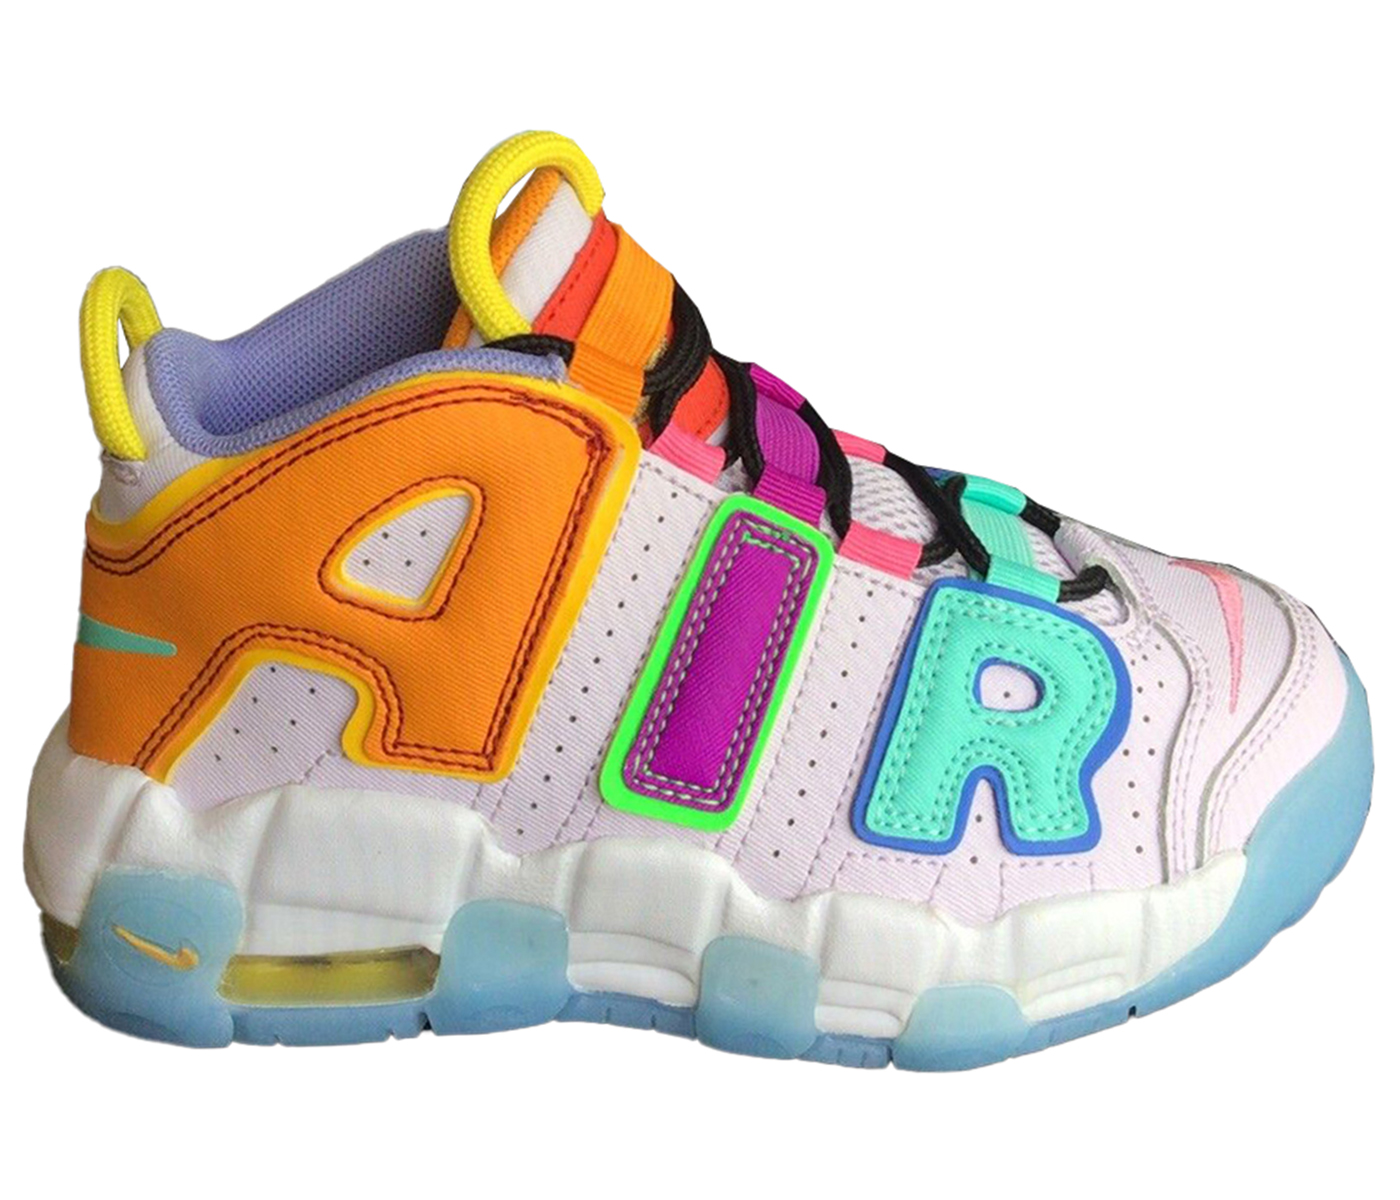 Nike Air More Uptempo Multi-Color (PS) Kids' - DH0828-500 - US